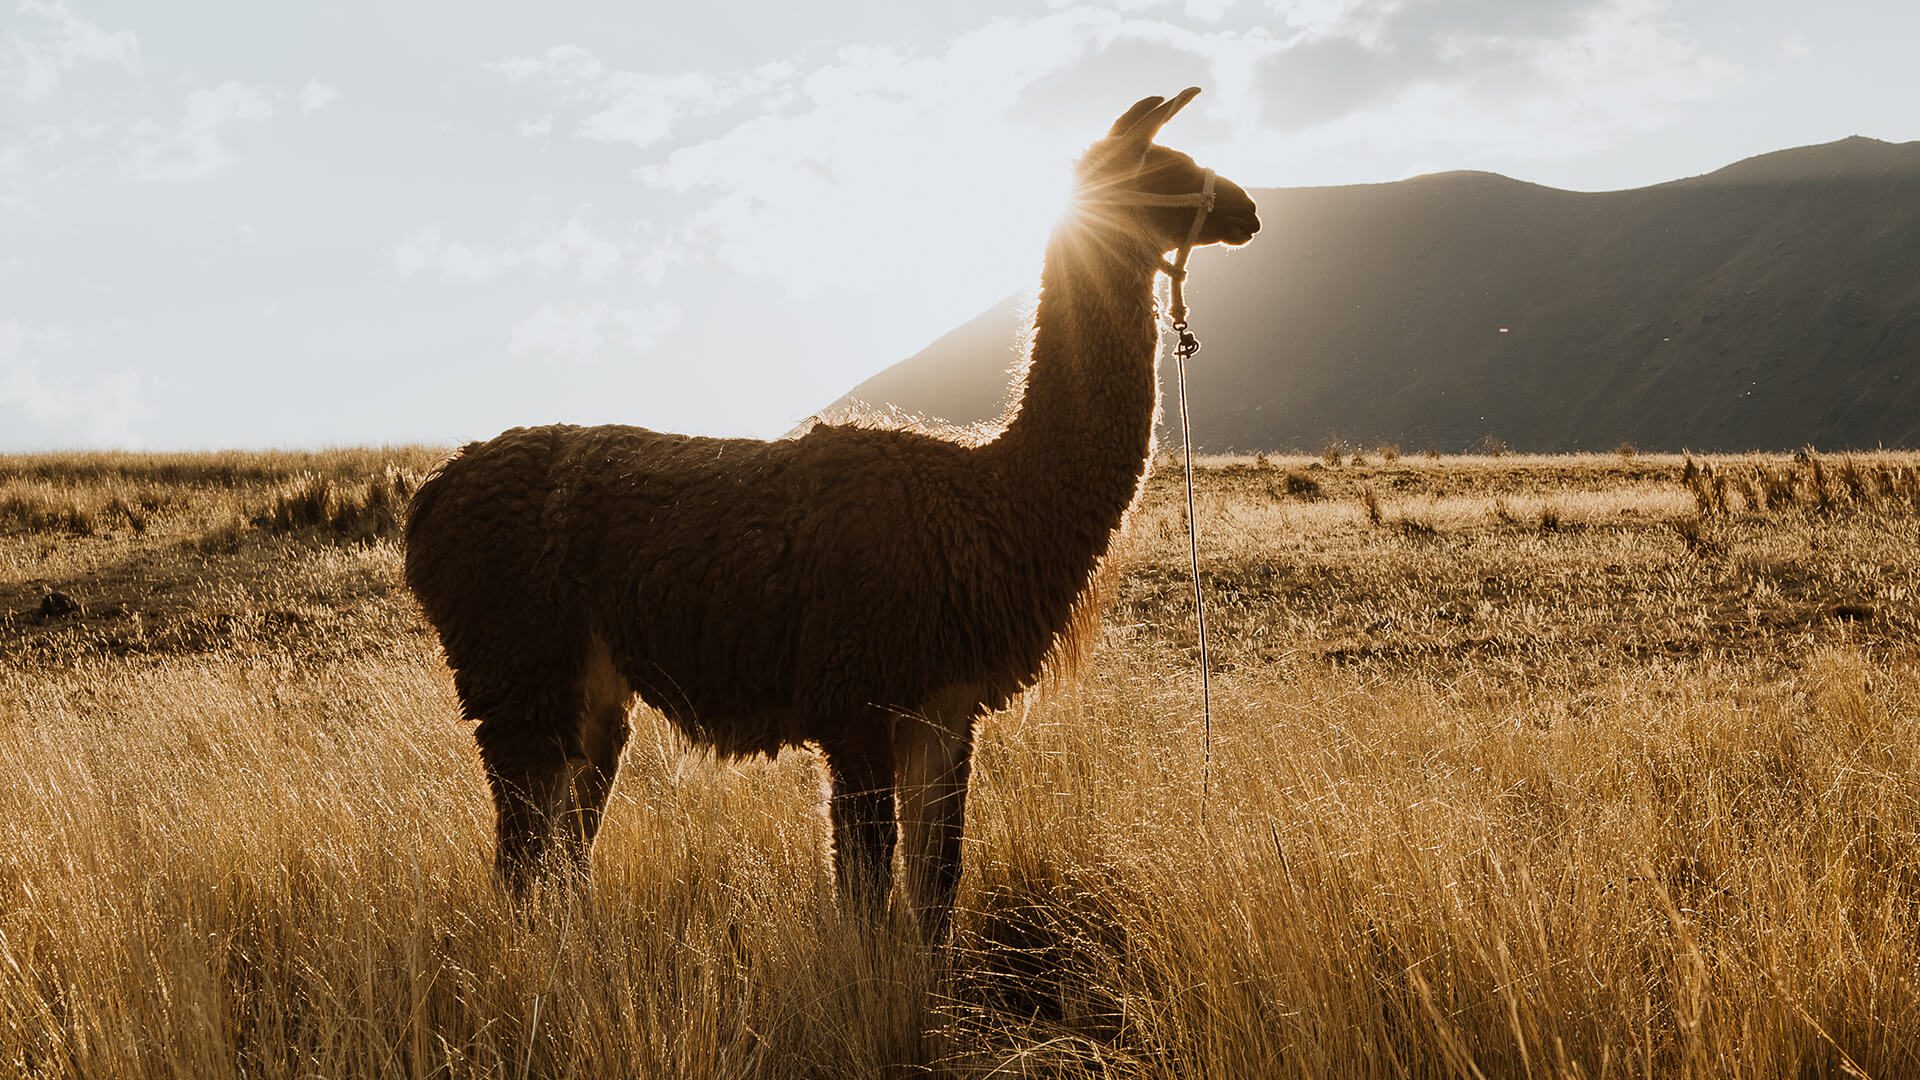 Llama portrayed against the sun (backlight) in an Andean grassland | Llama Trek Olleros to Chavin with RESPONSible Travel Peru | Photo by Bjorn Snelders